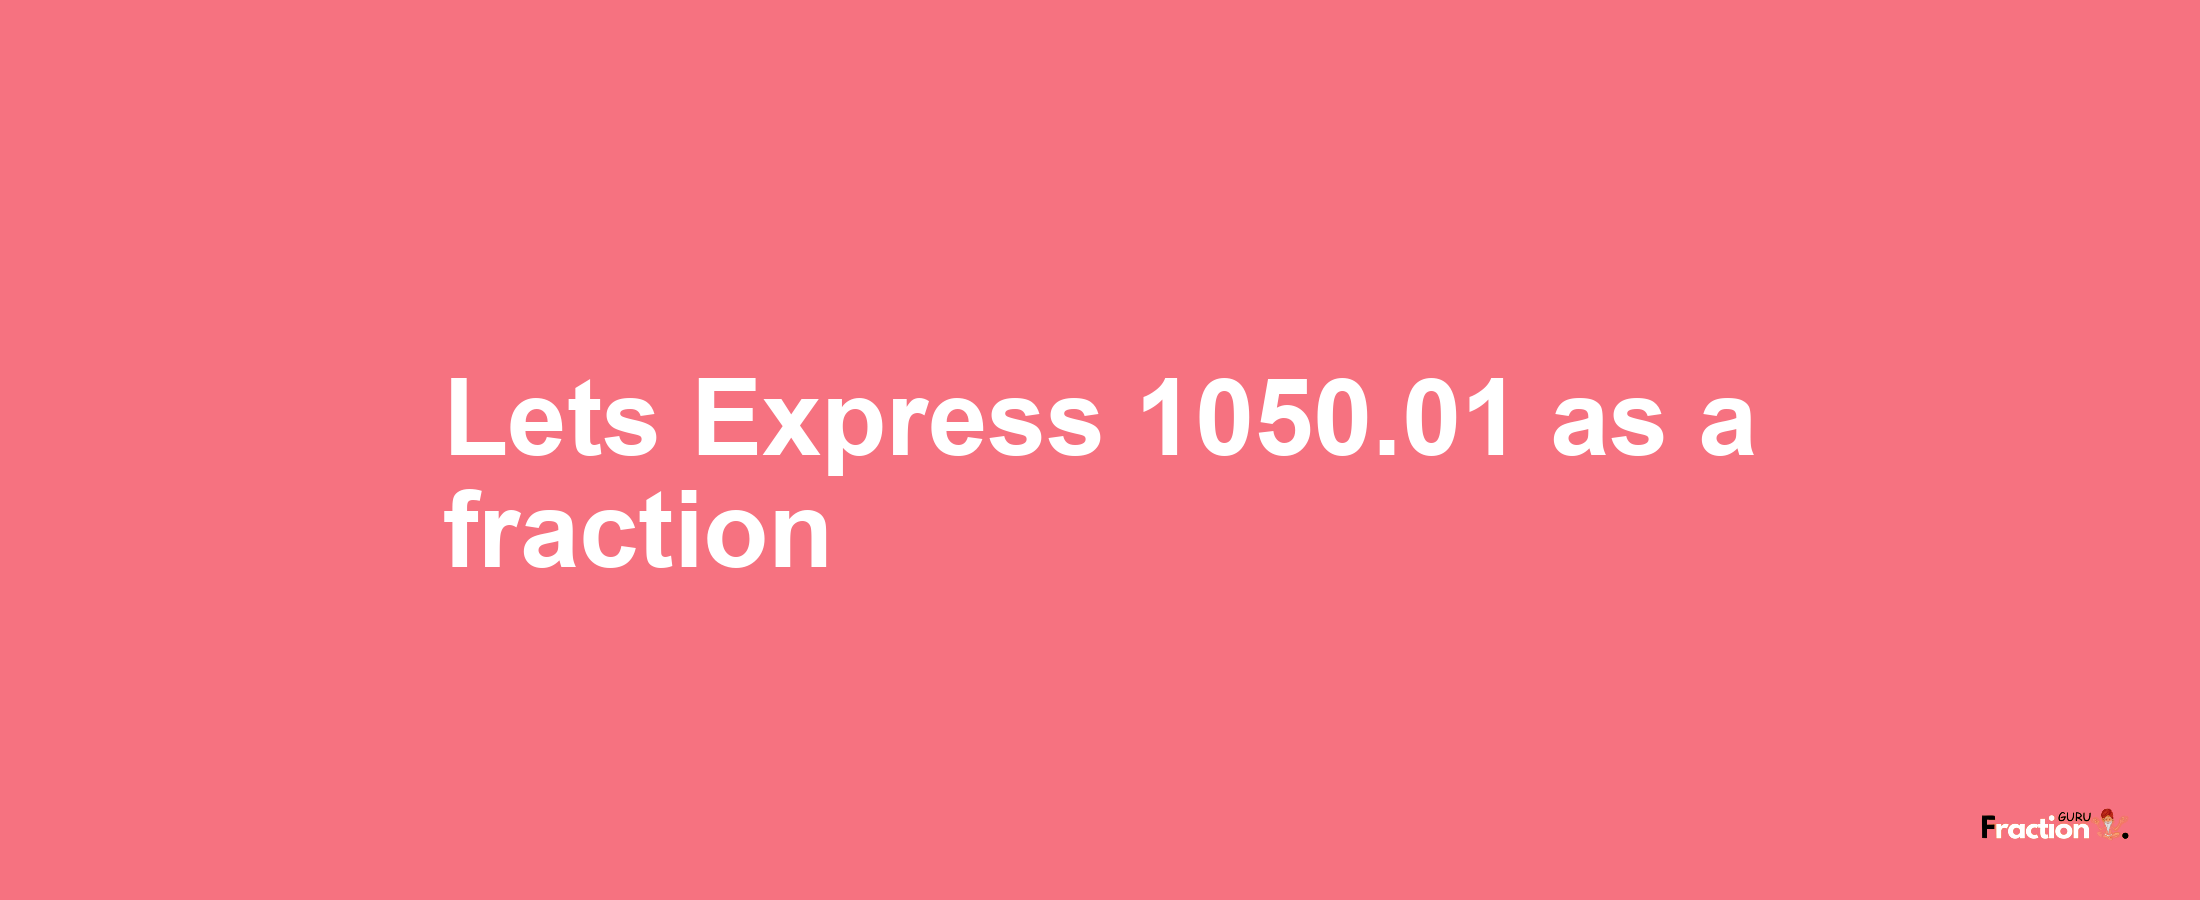 Lets Express 1050.01 as afraction